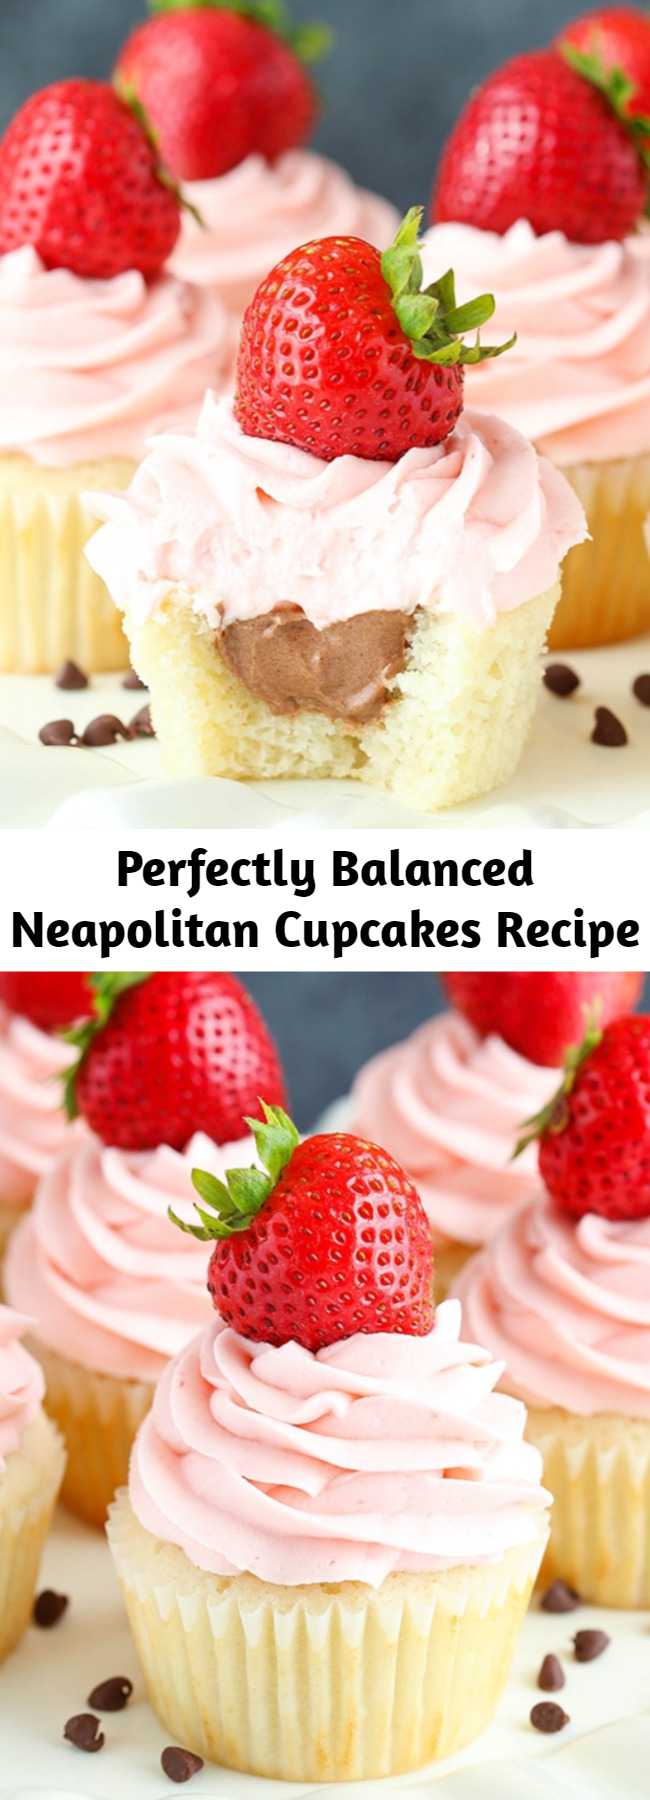 Perfectly Balanced Neapolitan Cupcakes Recipe - Neapolitan Cupcakes made with a vanilla cupcake, chocolate mousse filling and strawberry frosting! The flavors are so perfectly balanced – I love them!